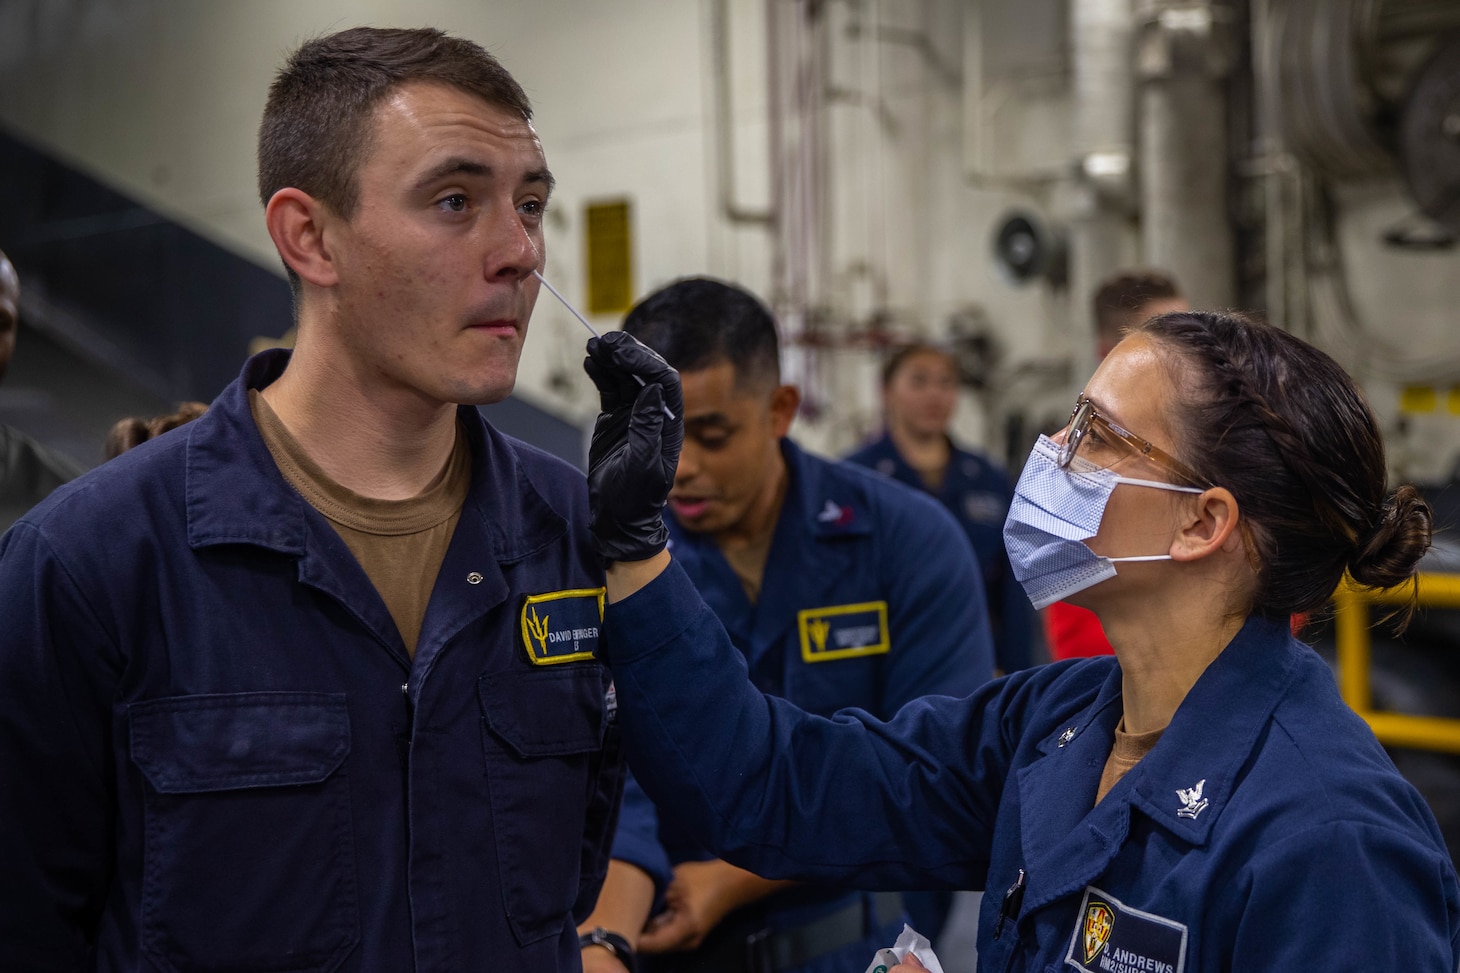 Hospital Corpsman 2nd Class Darian Andrews, from Defiance, Ohio, right, administers a COVID-19 test in the vehicle stowage area aboard amphibious assault carrier USS Tripoli (LHA 7), May 19, 2022. Tripoli is underway conducting routine operations in U.S. 7th Fleet. (U.S. Navy photo by Mass Communication Specialist 3rd Class Maci Sternod)